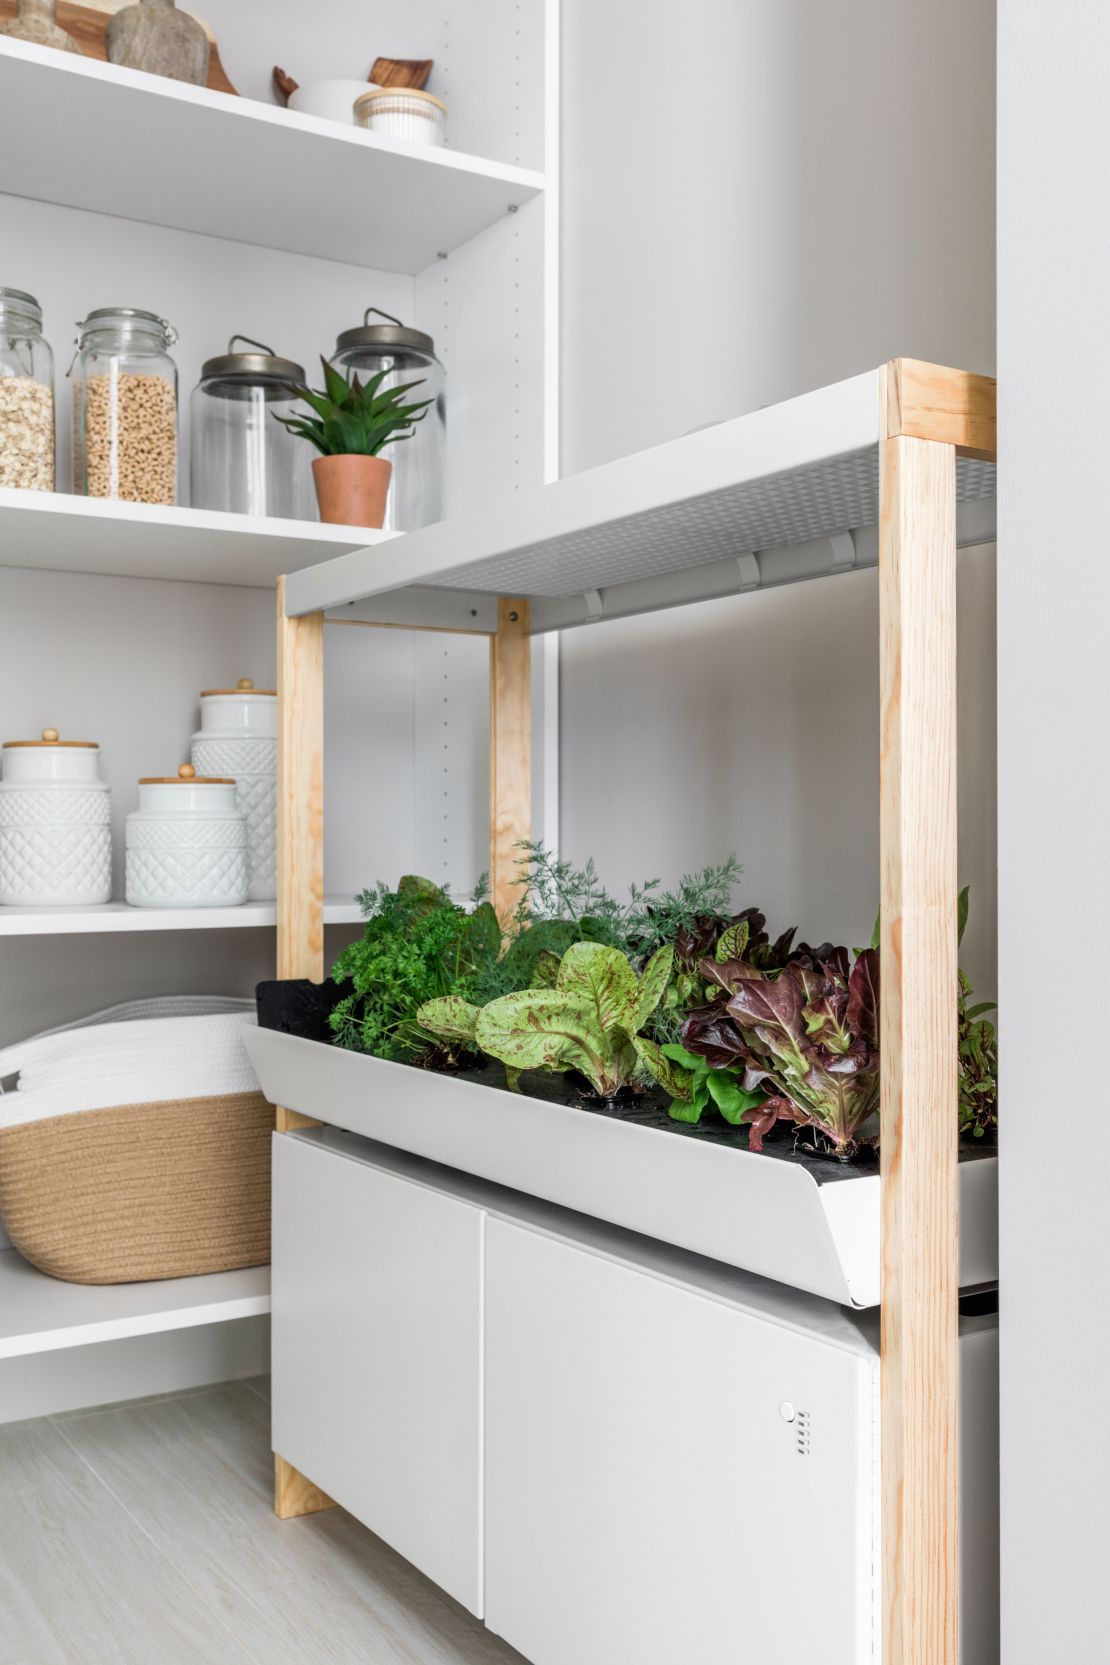 This pantry includes a hydroponic garden with smart grow lighting that makes it easy to grow produce at home year-round.